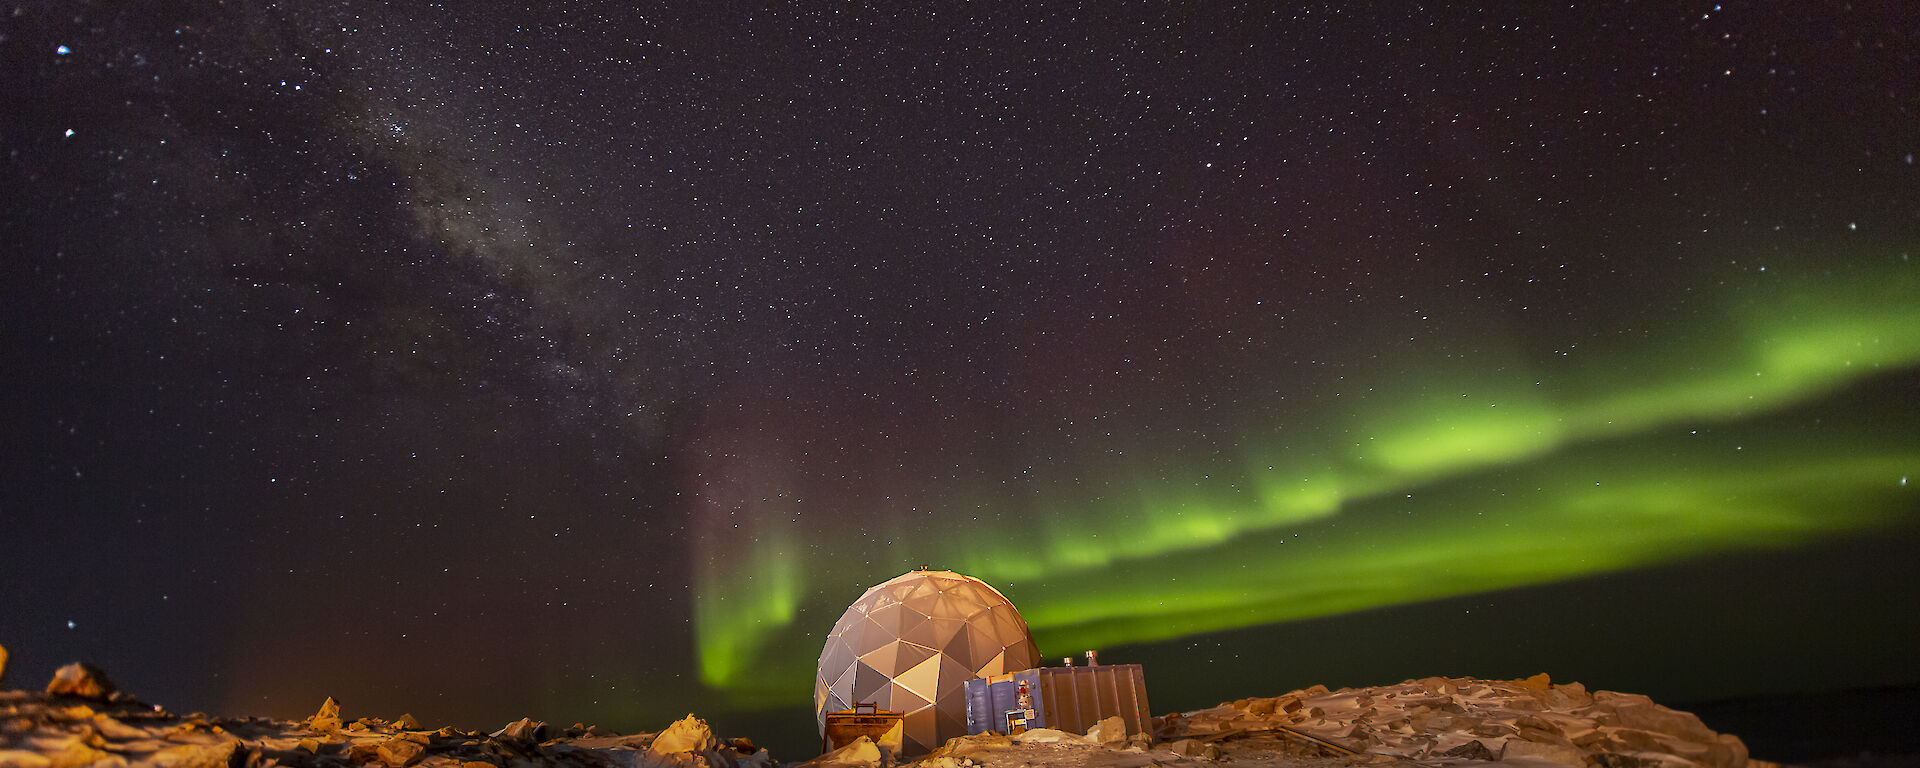 A polyhedral structure on rocky, snowy ground, beneath a night sky lit up with an aurora, presently showing as two parallel bands of bright green light